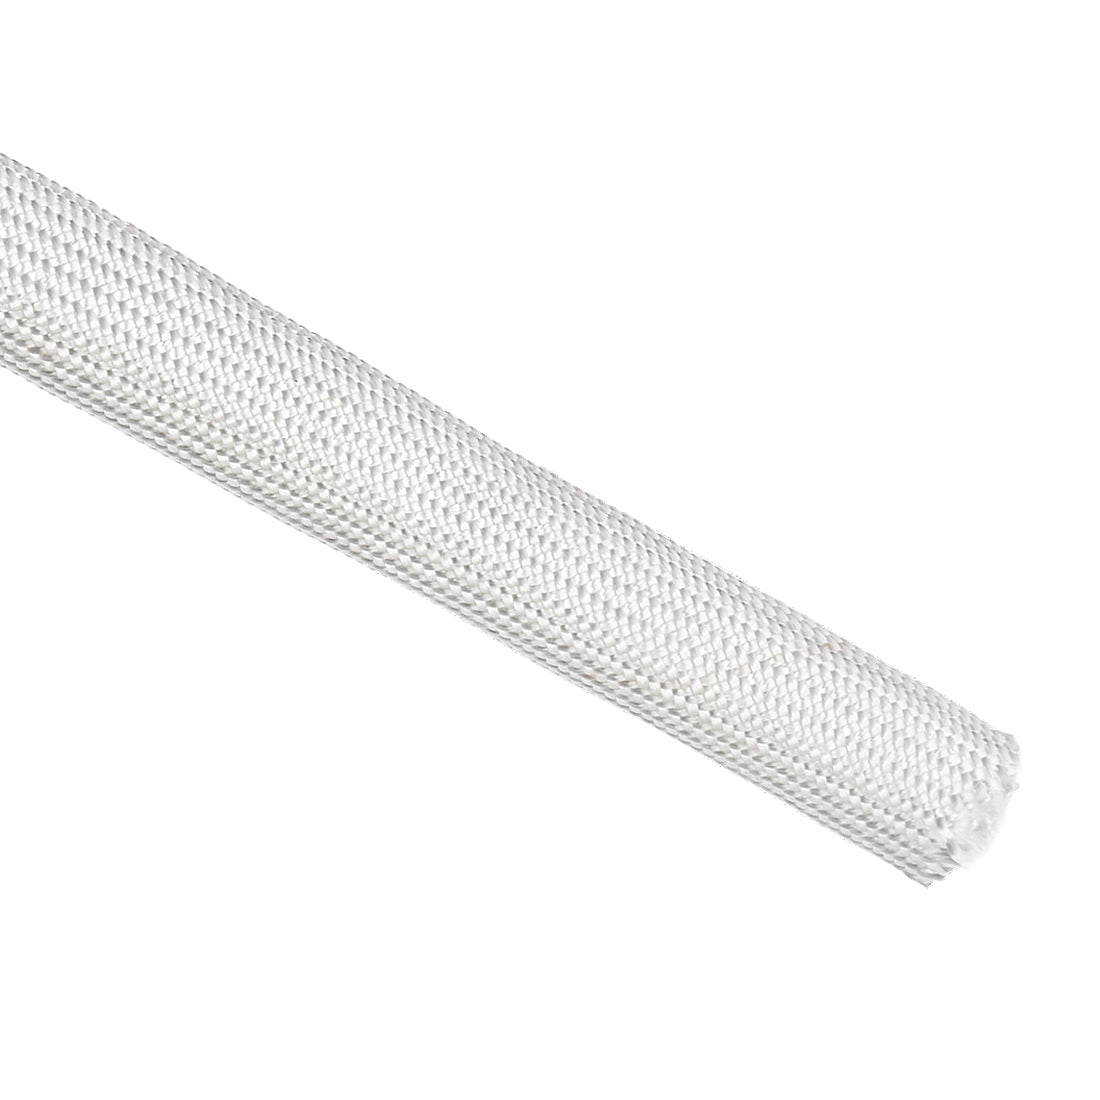 uxcell Uxcell Insulation Cable Protector, 3.3Ft-14mm High TEMP Fiberglass Sleeve White